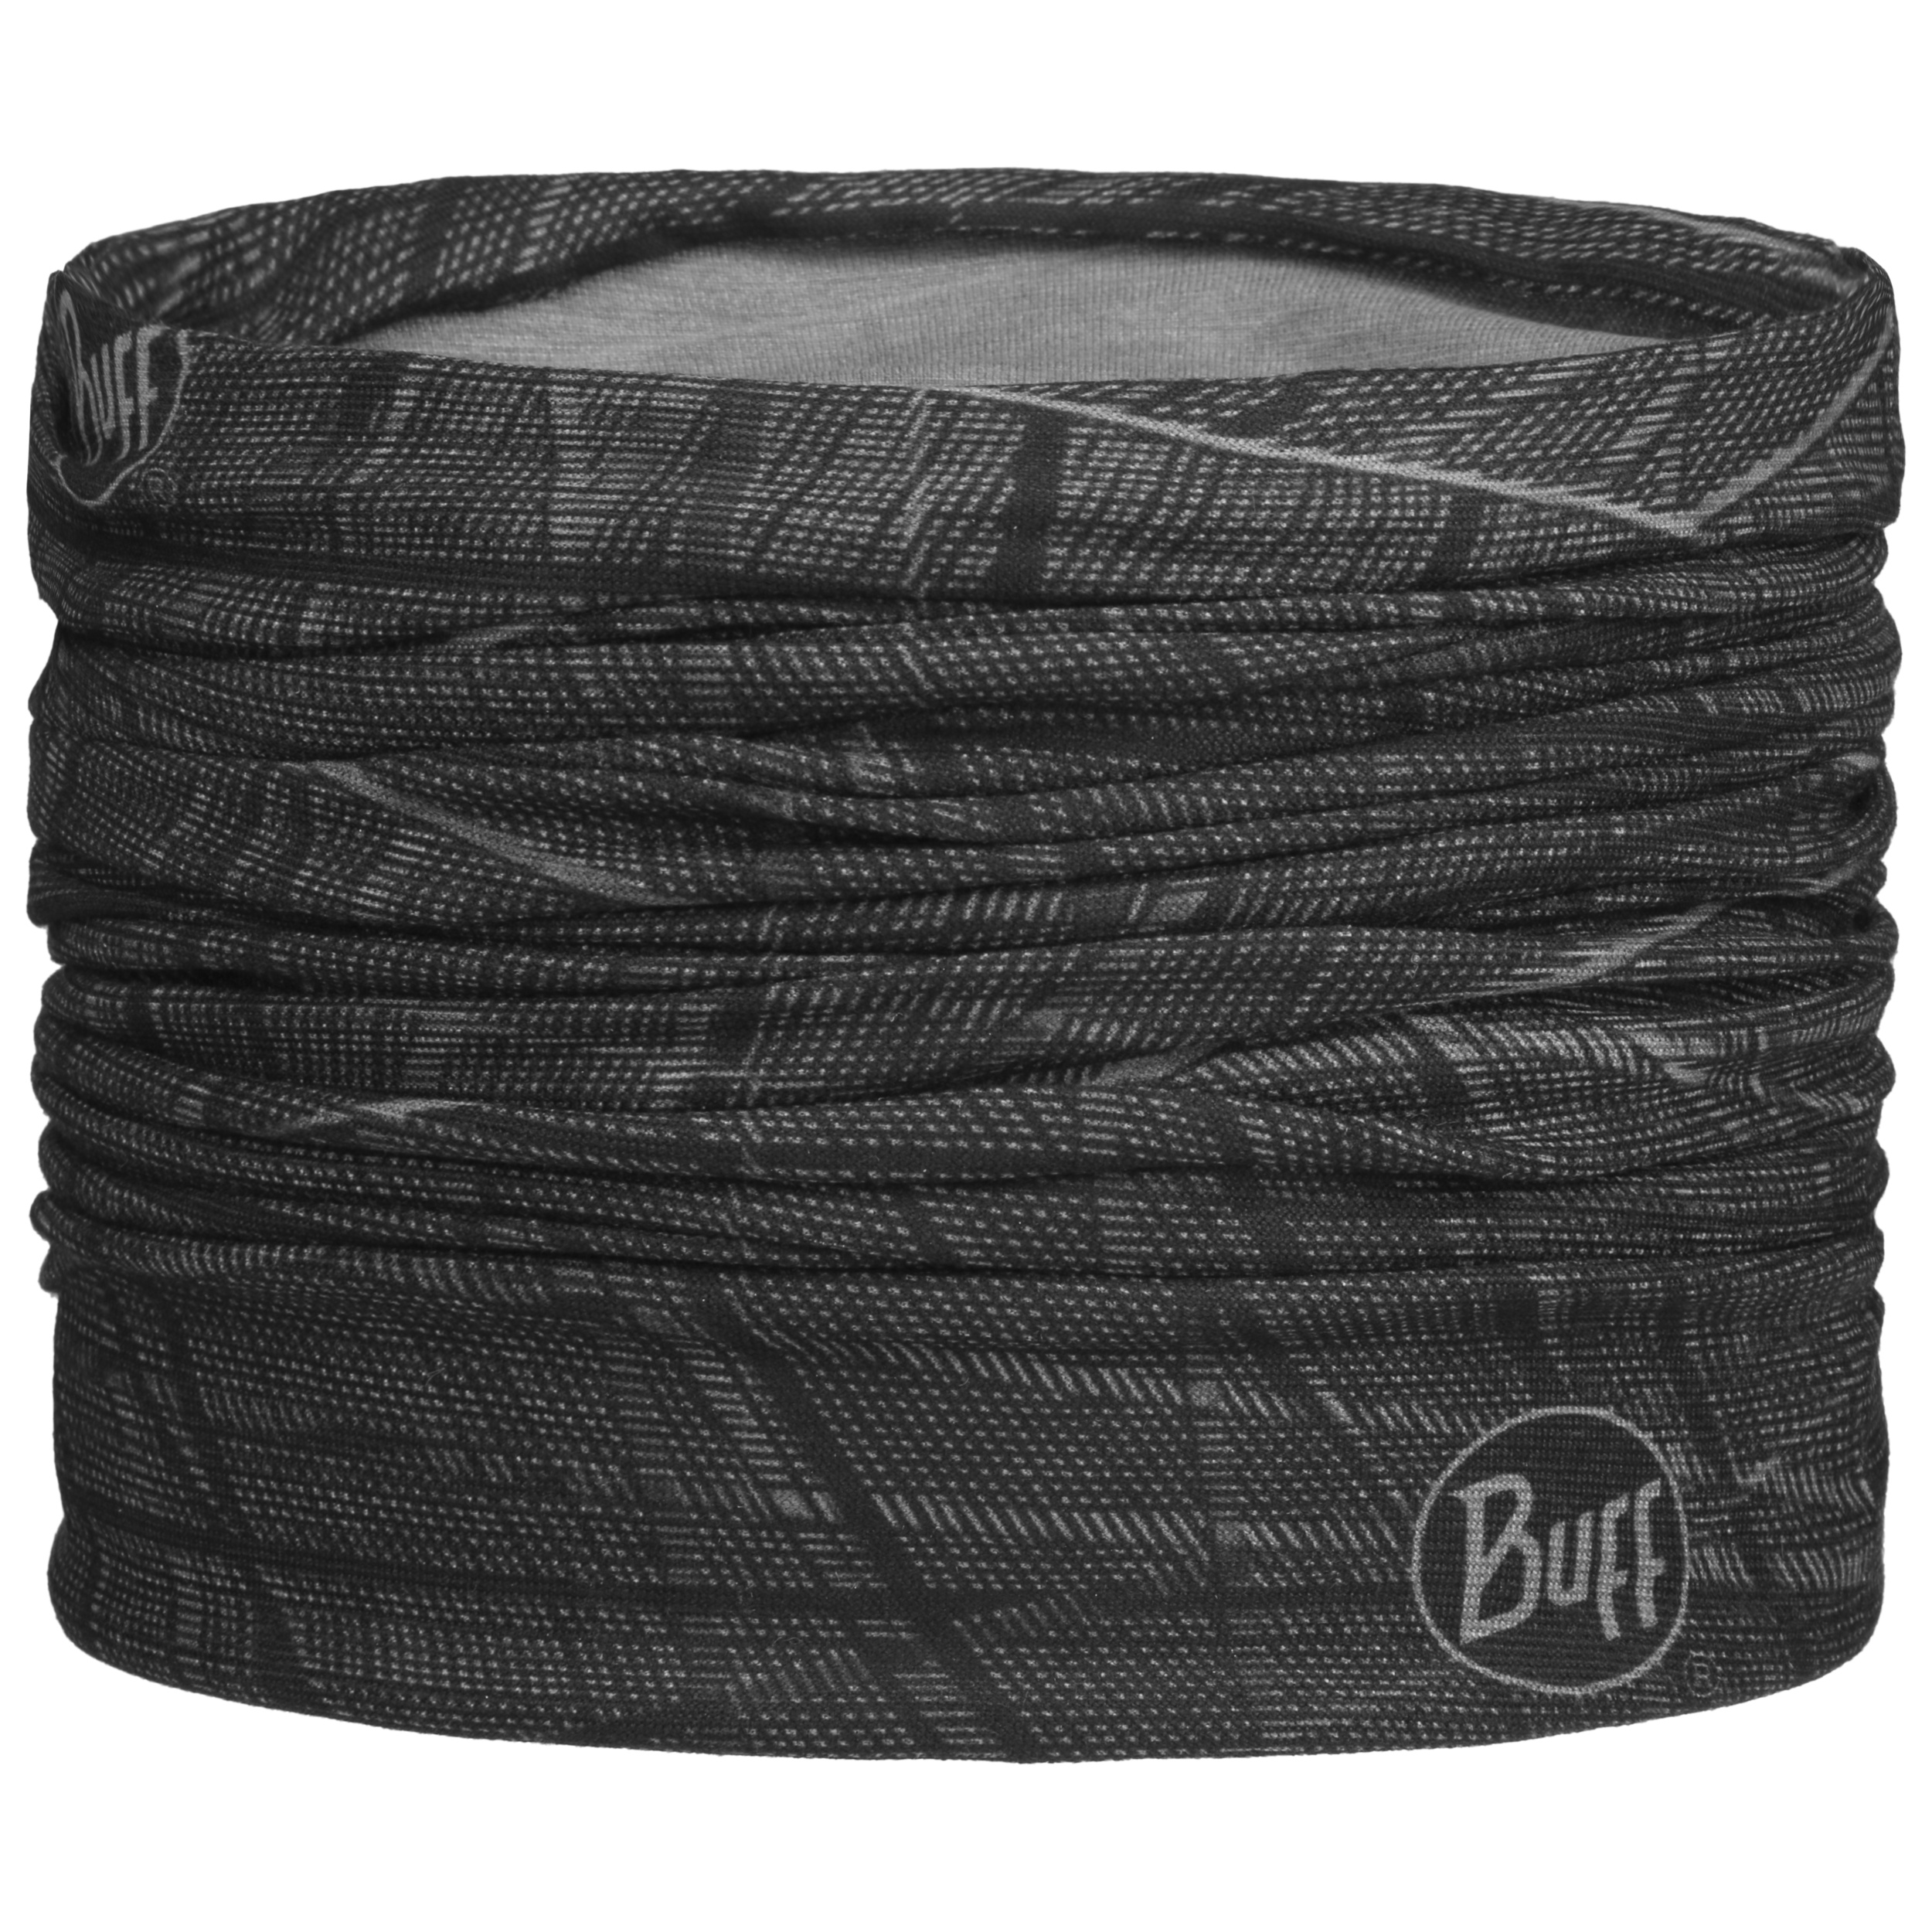 Embers Black Multifunktionstuch by BUFF - 14,95 €